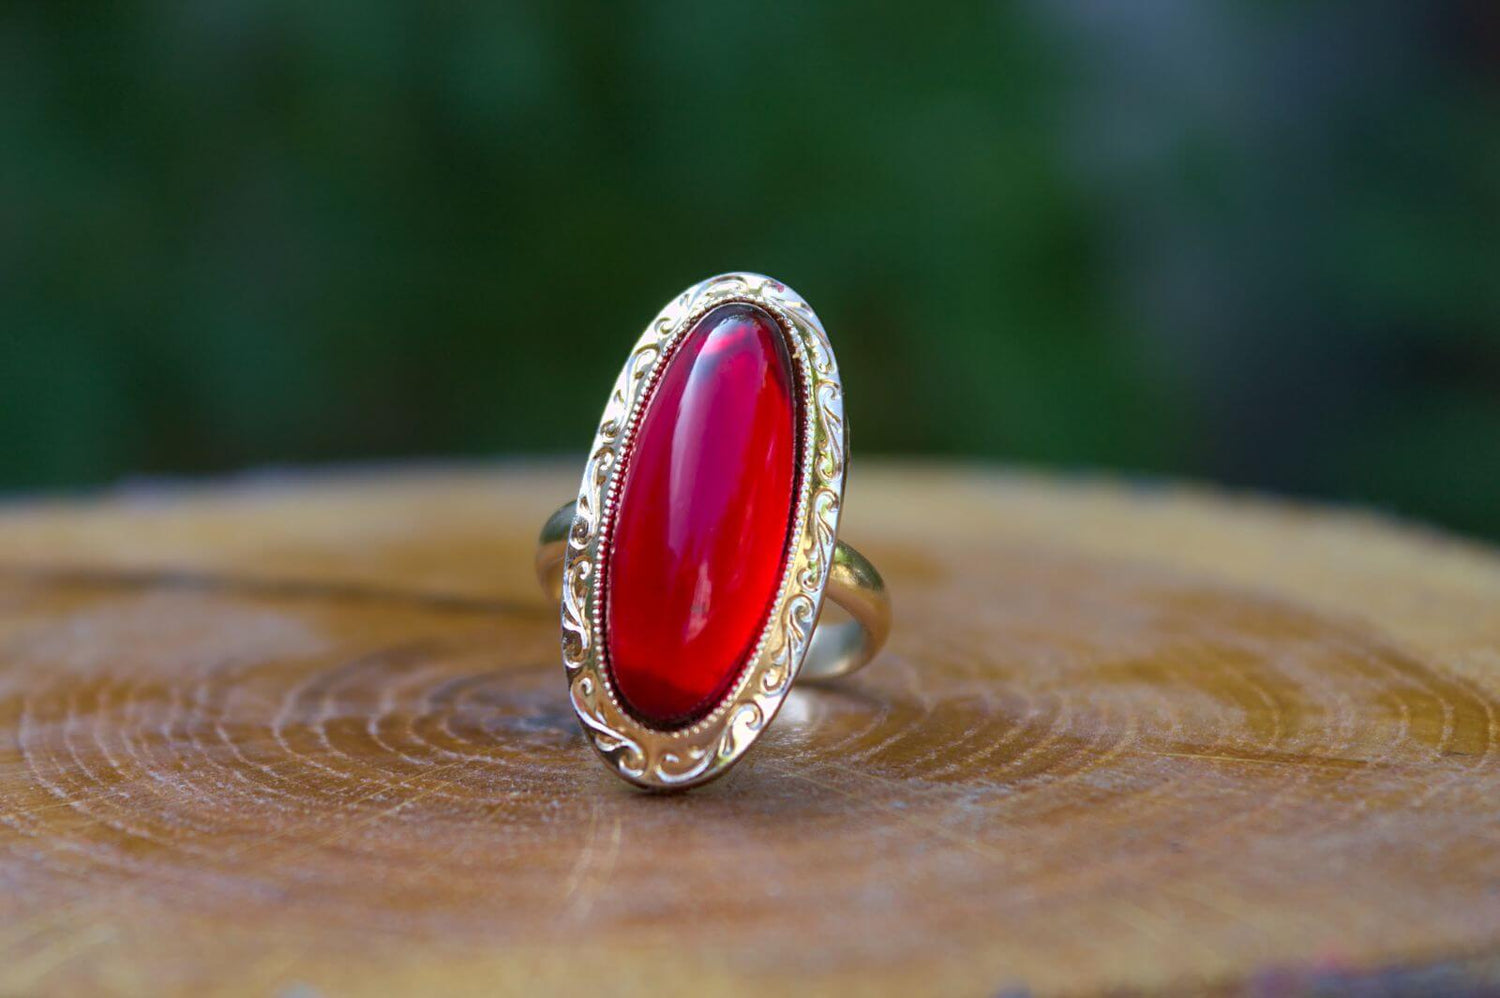 Red Coral Gems: Healing Properties, Benefits, and Meanings